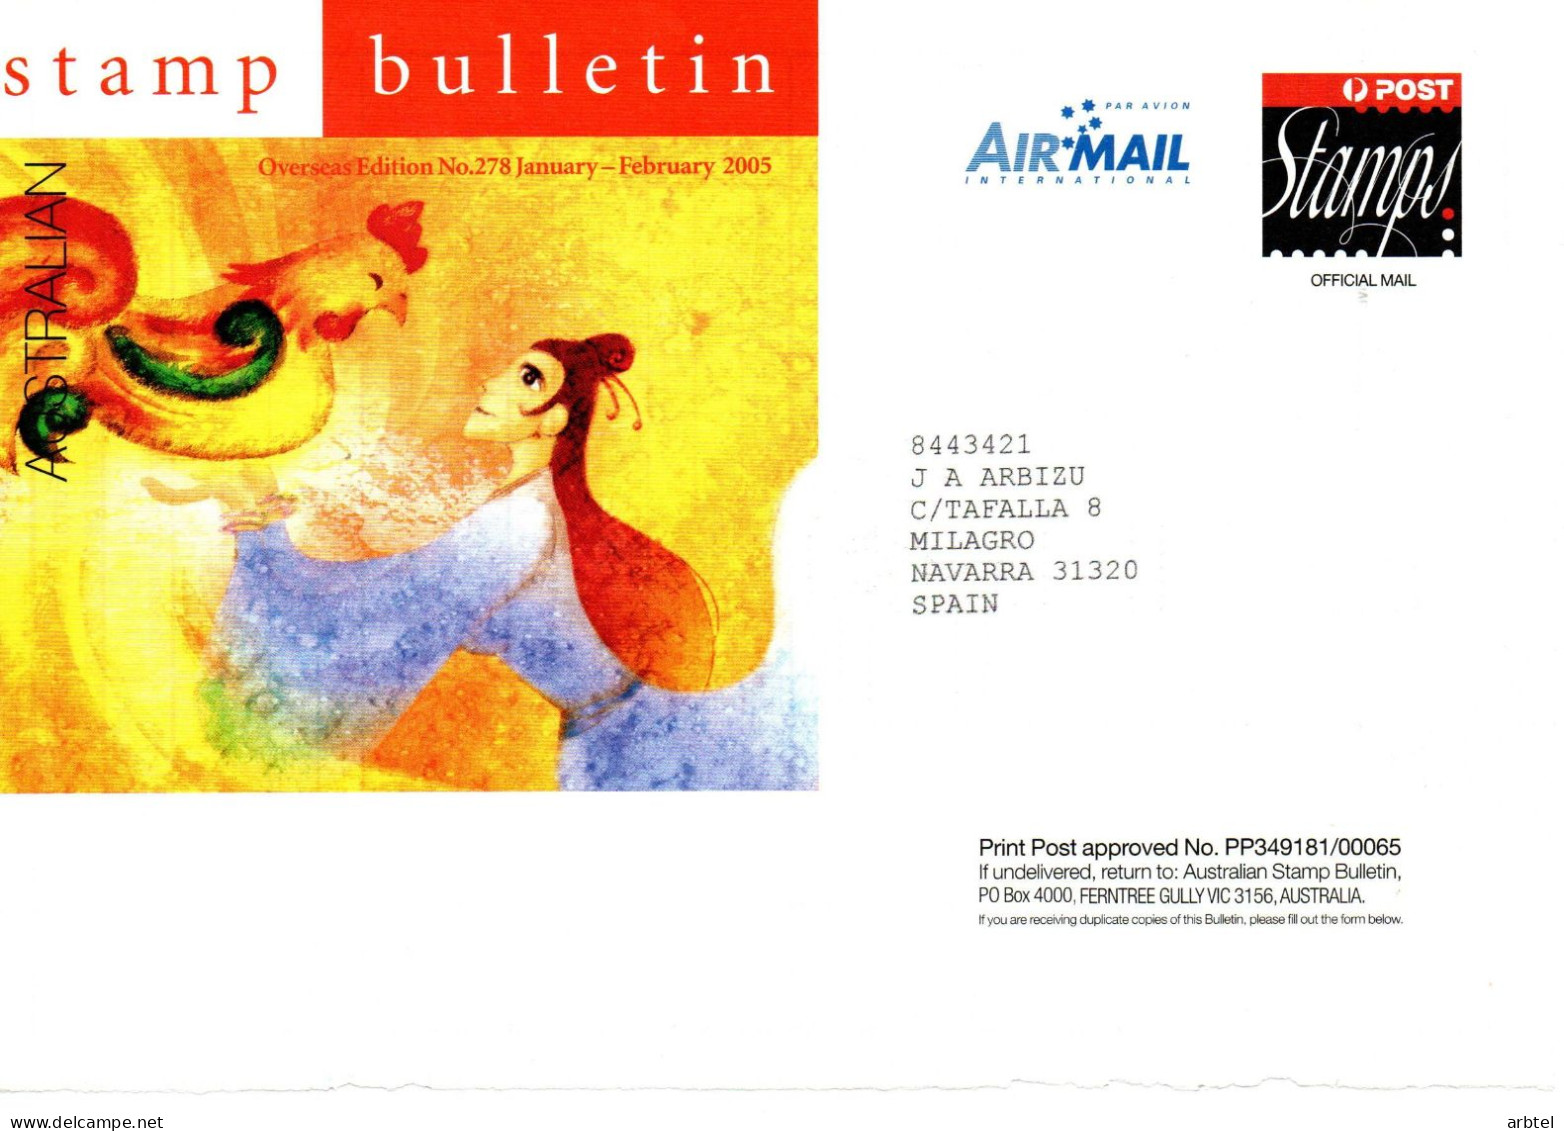 AUSTRALIA STAMP BULLETIN FRONTAL FRONT OFFICIAL MAIL 2005 ARTE GALLINA HEN - Galline & Gallinaceo